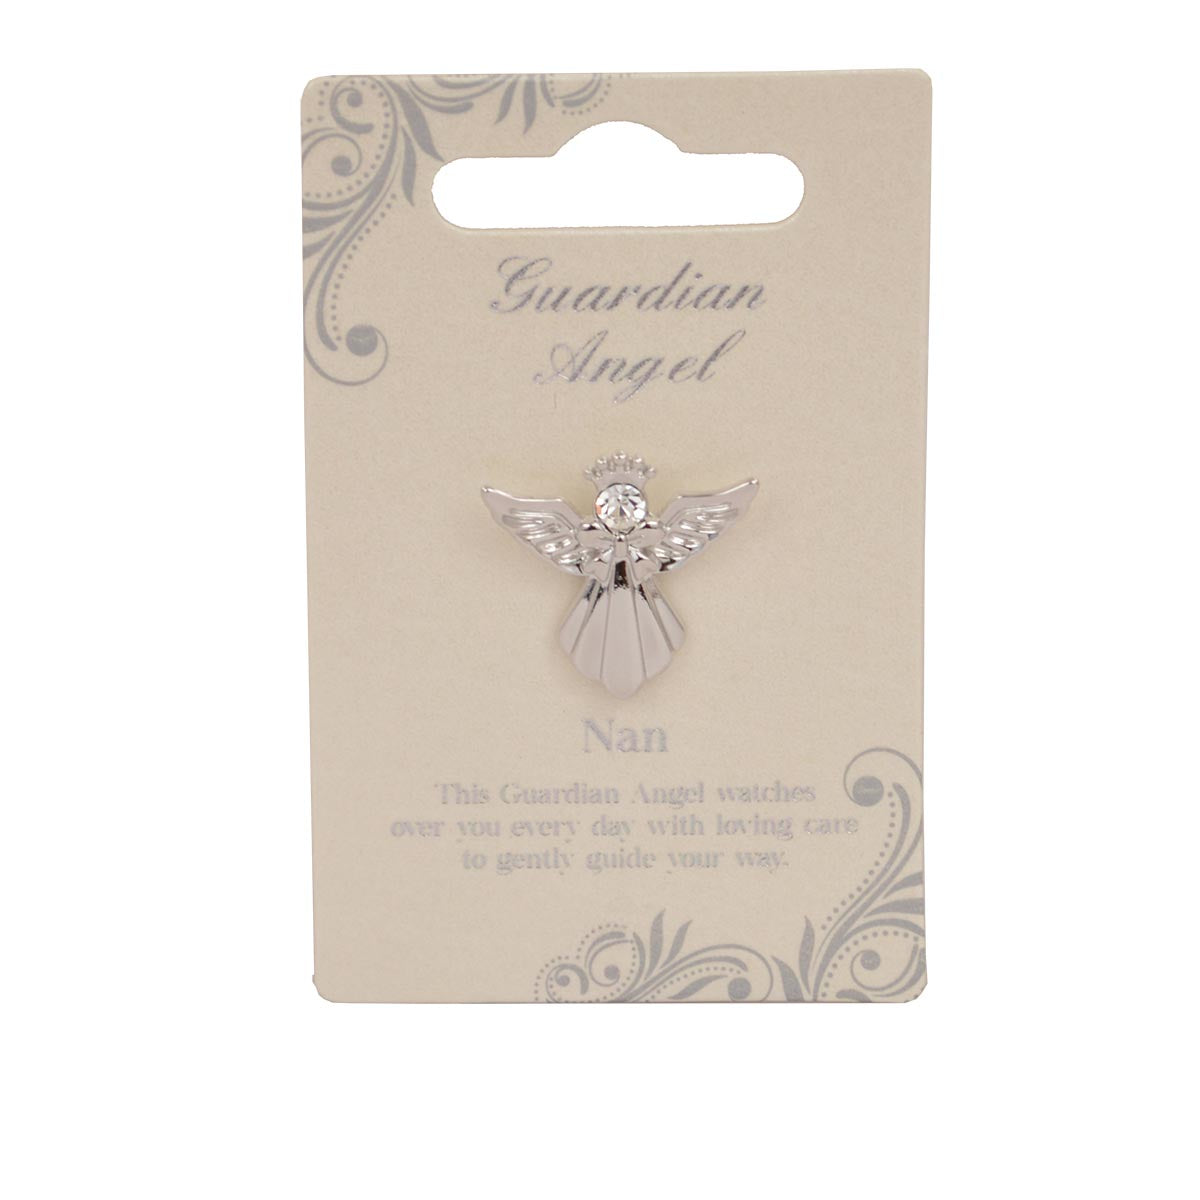 Nan Guardian Angel Silver Coloured Angel Pin With Gem Stone